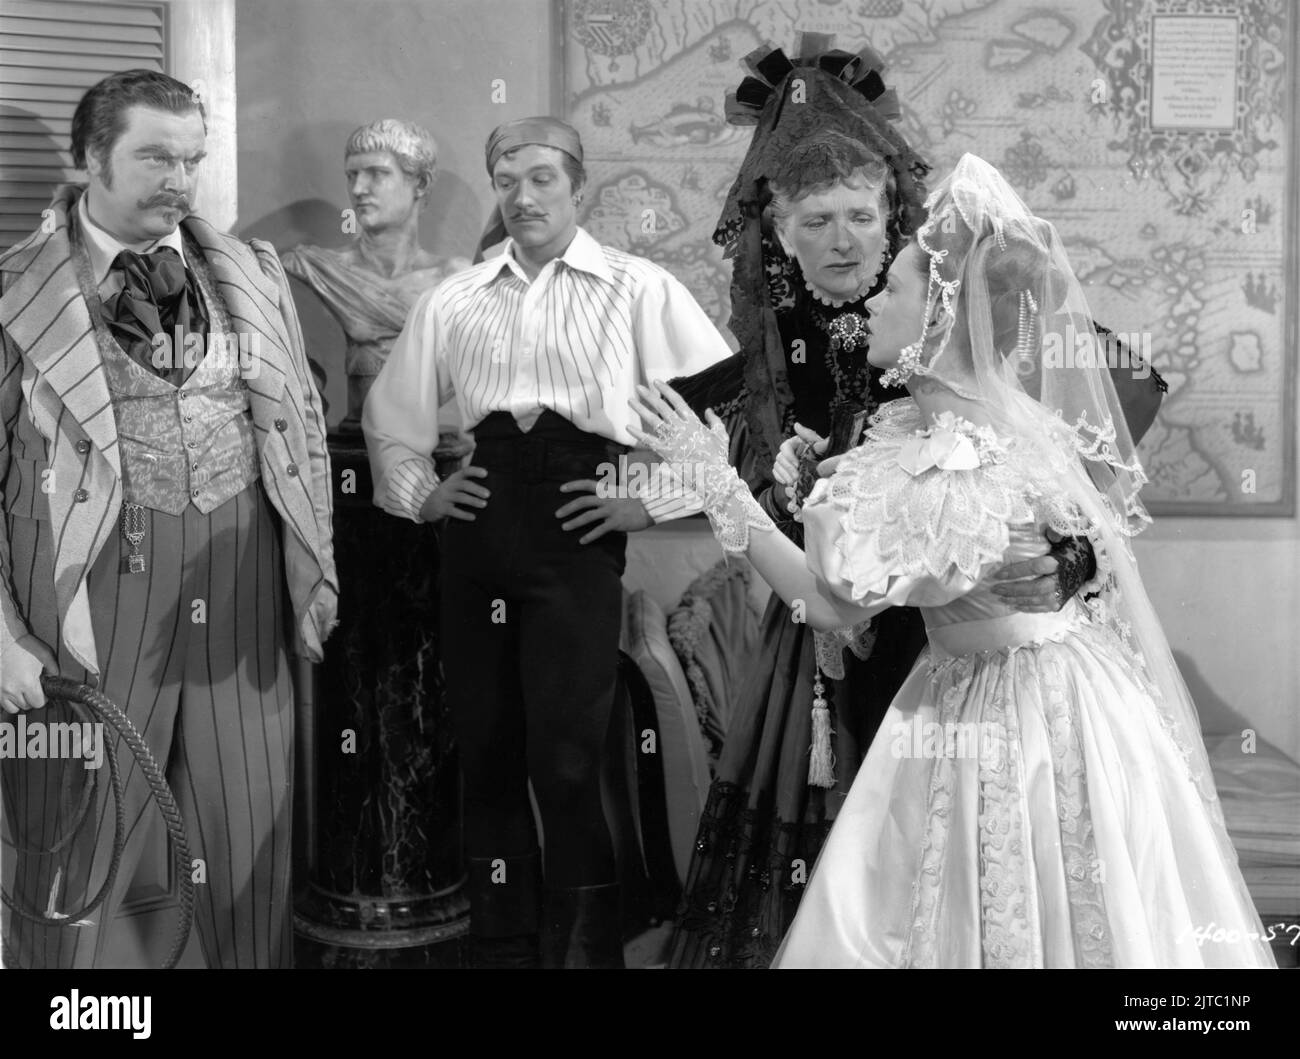 WALTER SLEZAK GENE KELLY GLADYS COOPER and JUDY GARLAND in THE PIRATE 1948 director VINCENTE MINNELLI play S.N. Behrman songs by Cole Porter costume design Tom Keogh producer Arthur Freed Metro Goldwyn Mayer Stock Photo